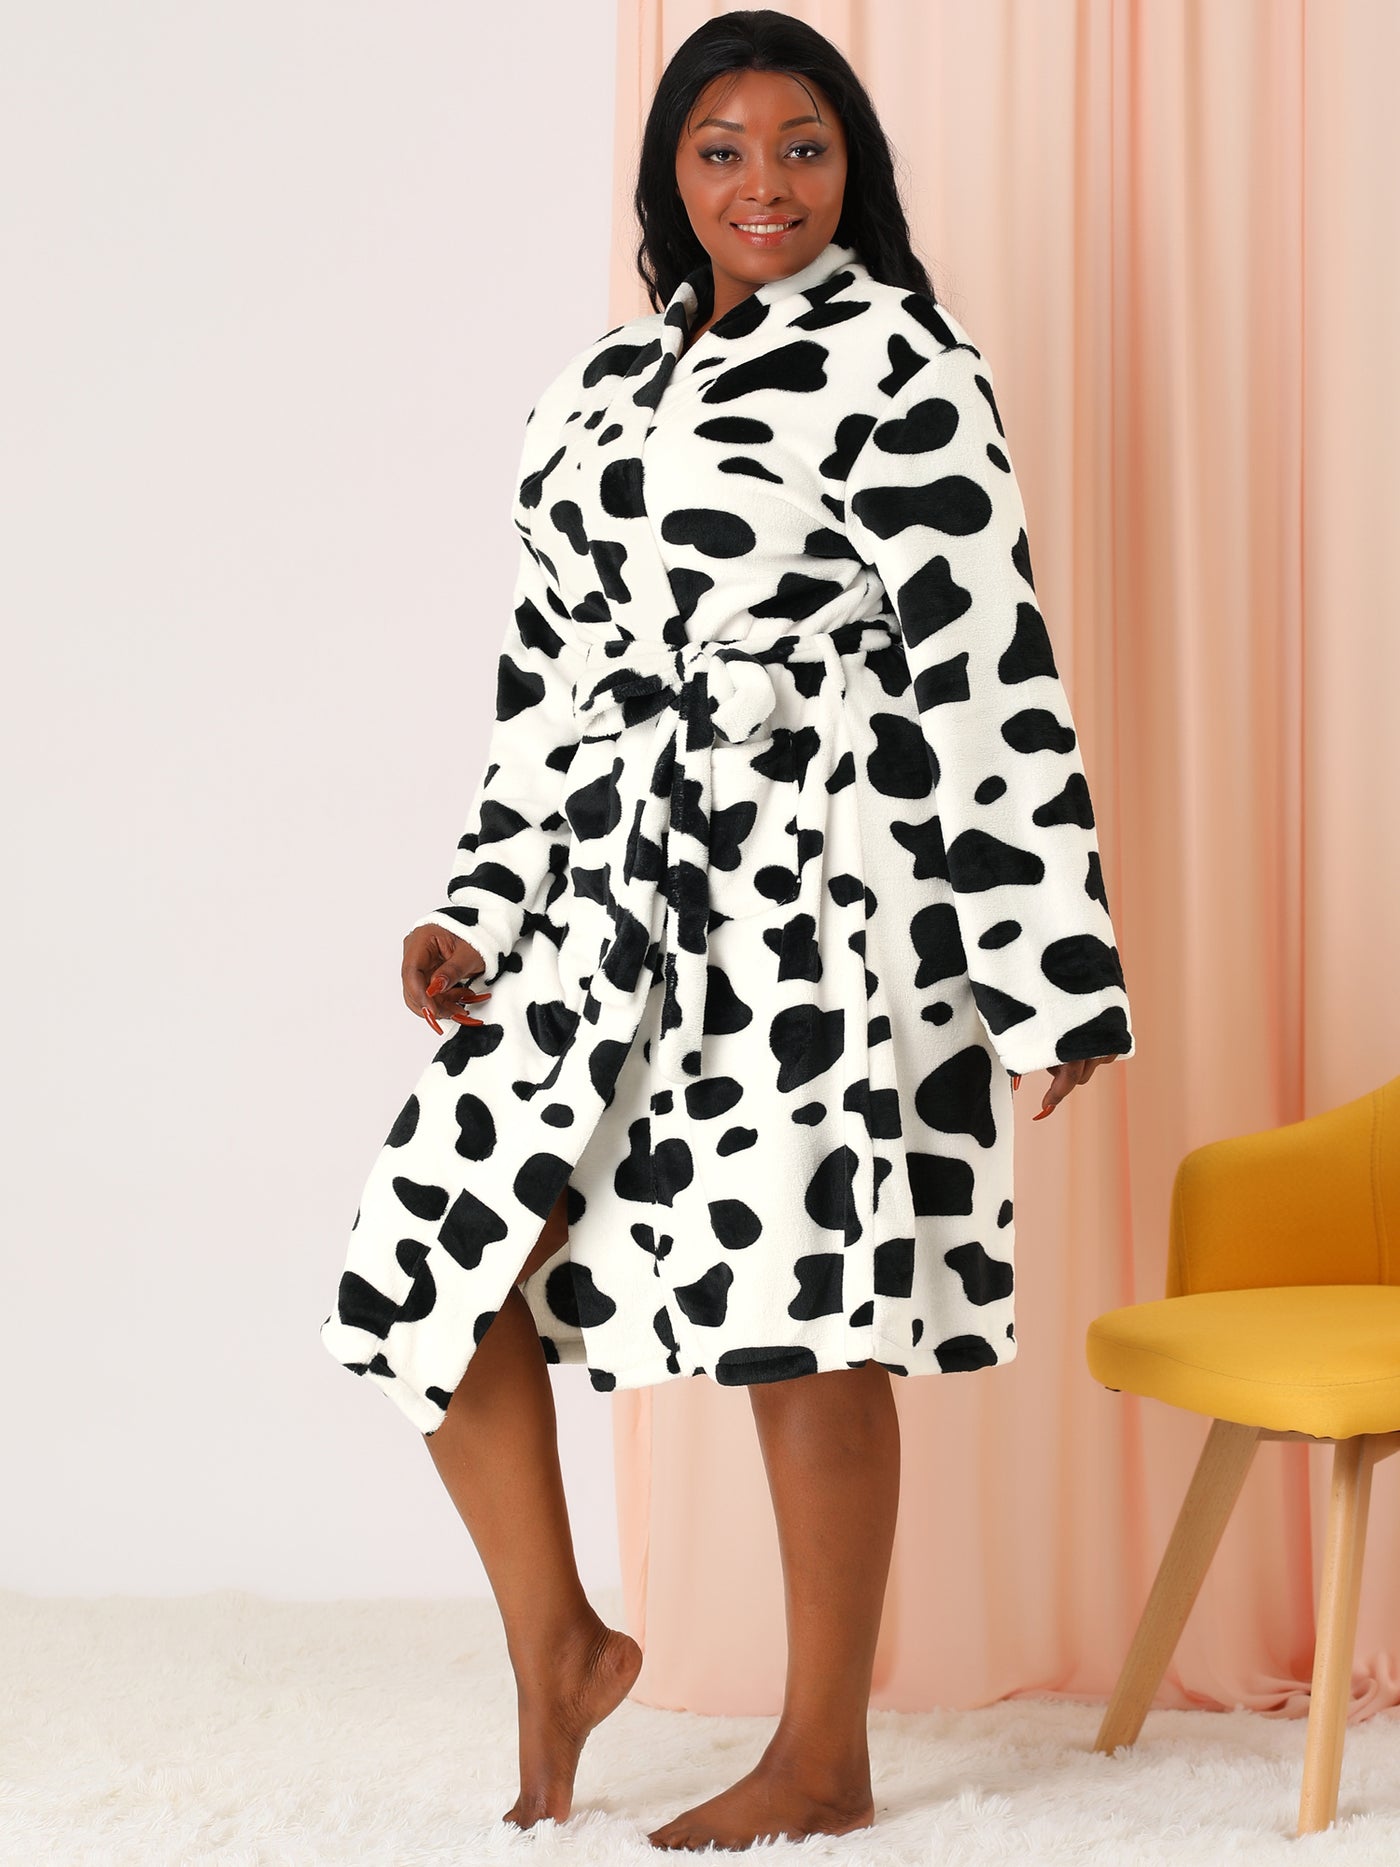 Bublédon Flannel Plus Size Cow Printed Nightgown Winter Robe